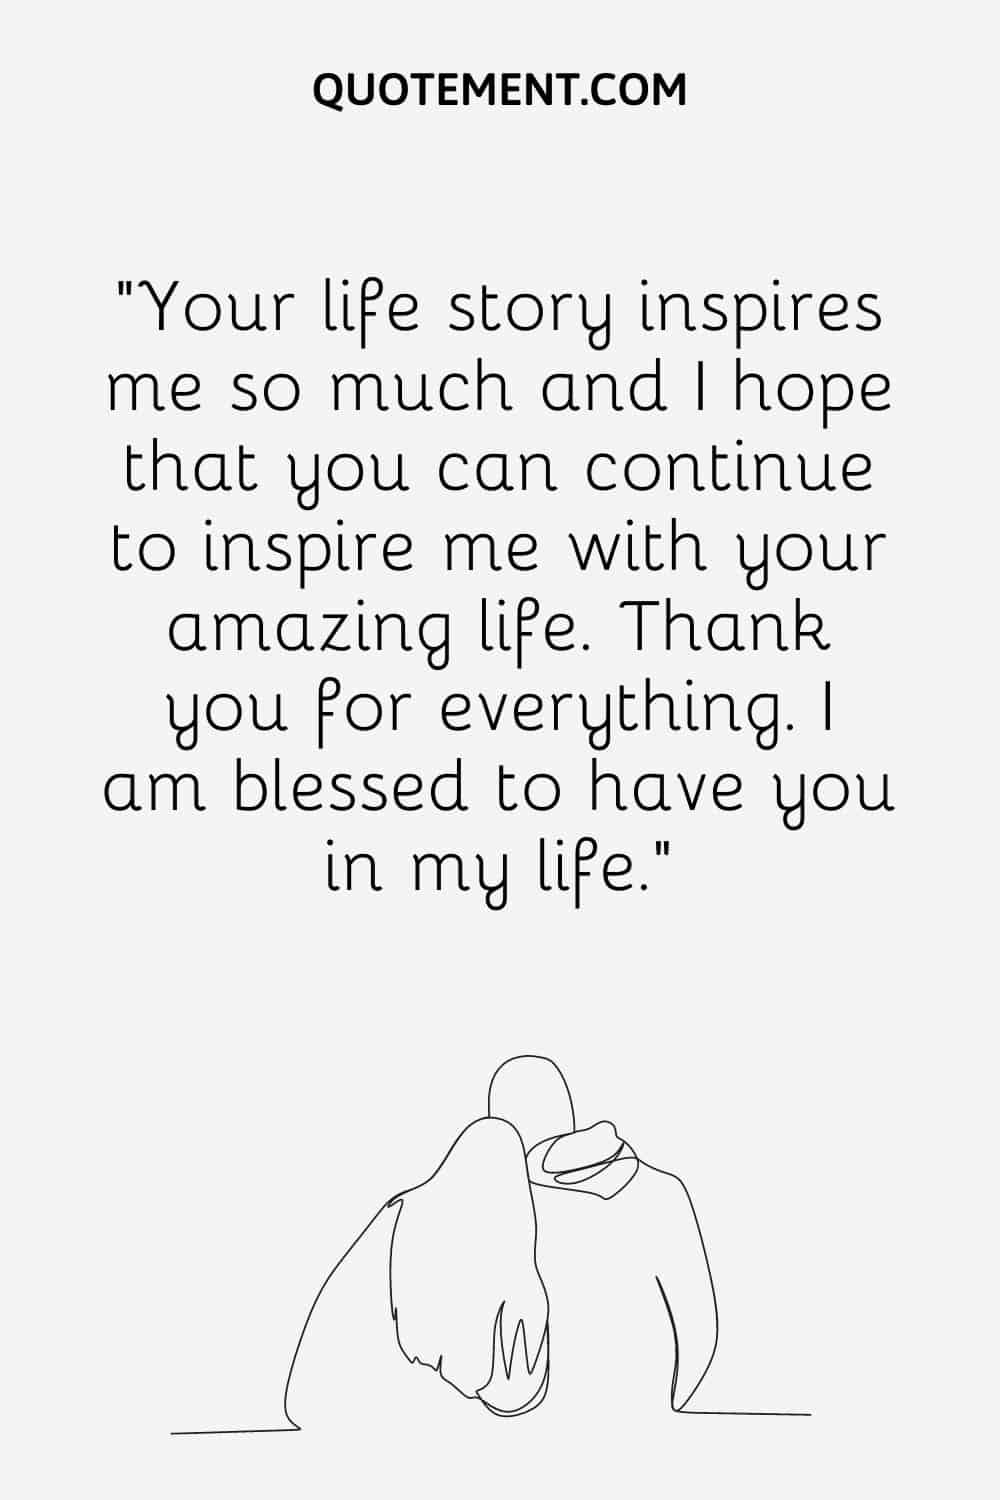 Your life story inspires me so much and I hope that you can continue to inspire me with your amazing life